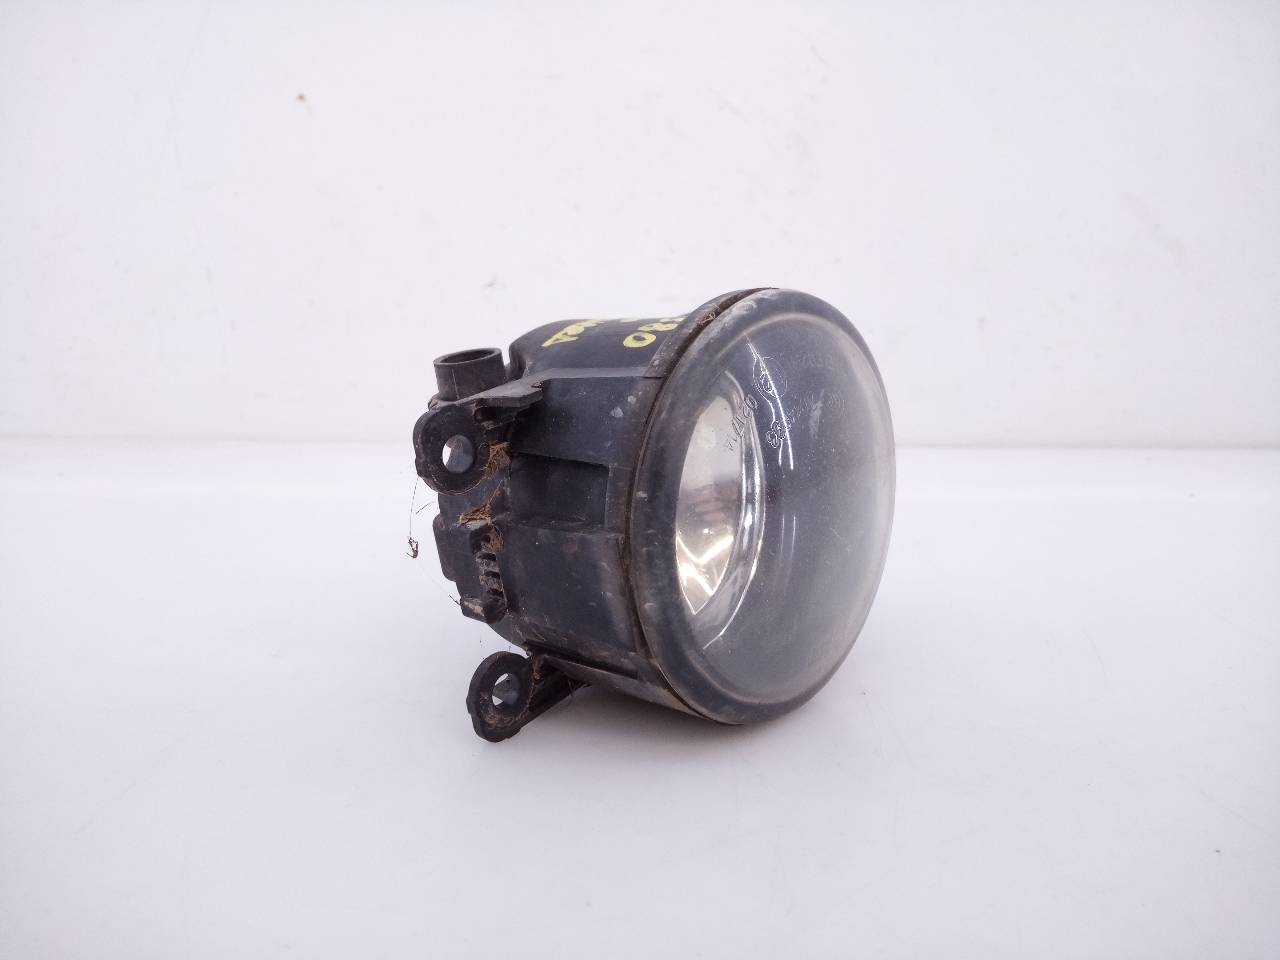 NISSAN NP300 1 generation (2008-2015) Front Right Fog Light 89210549, E2-A4-34-2 20627647